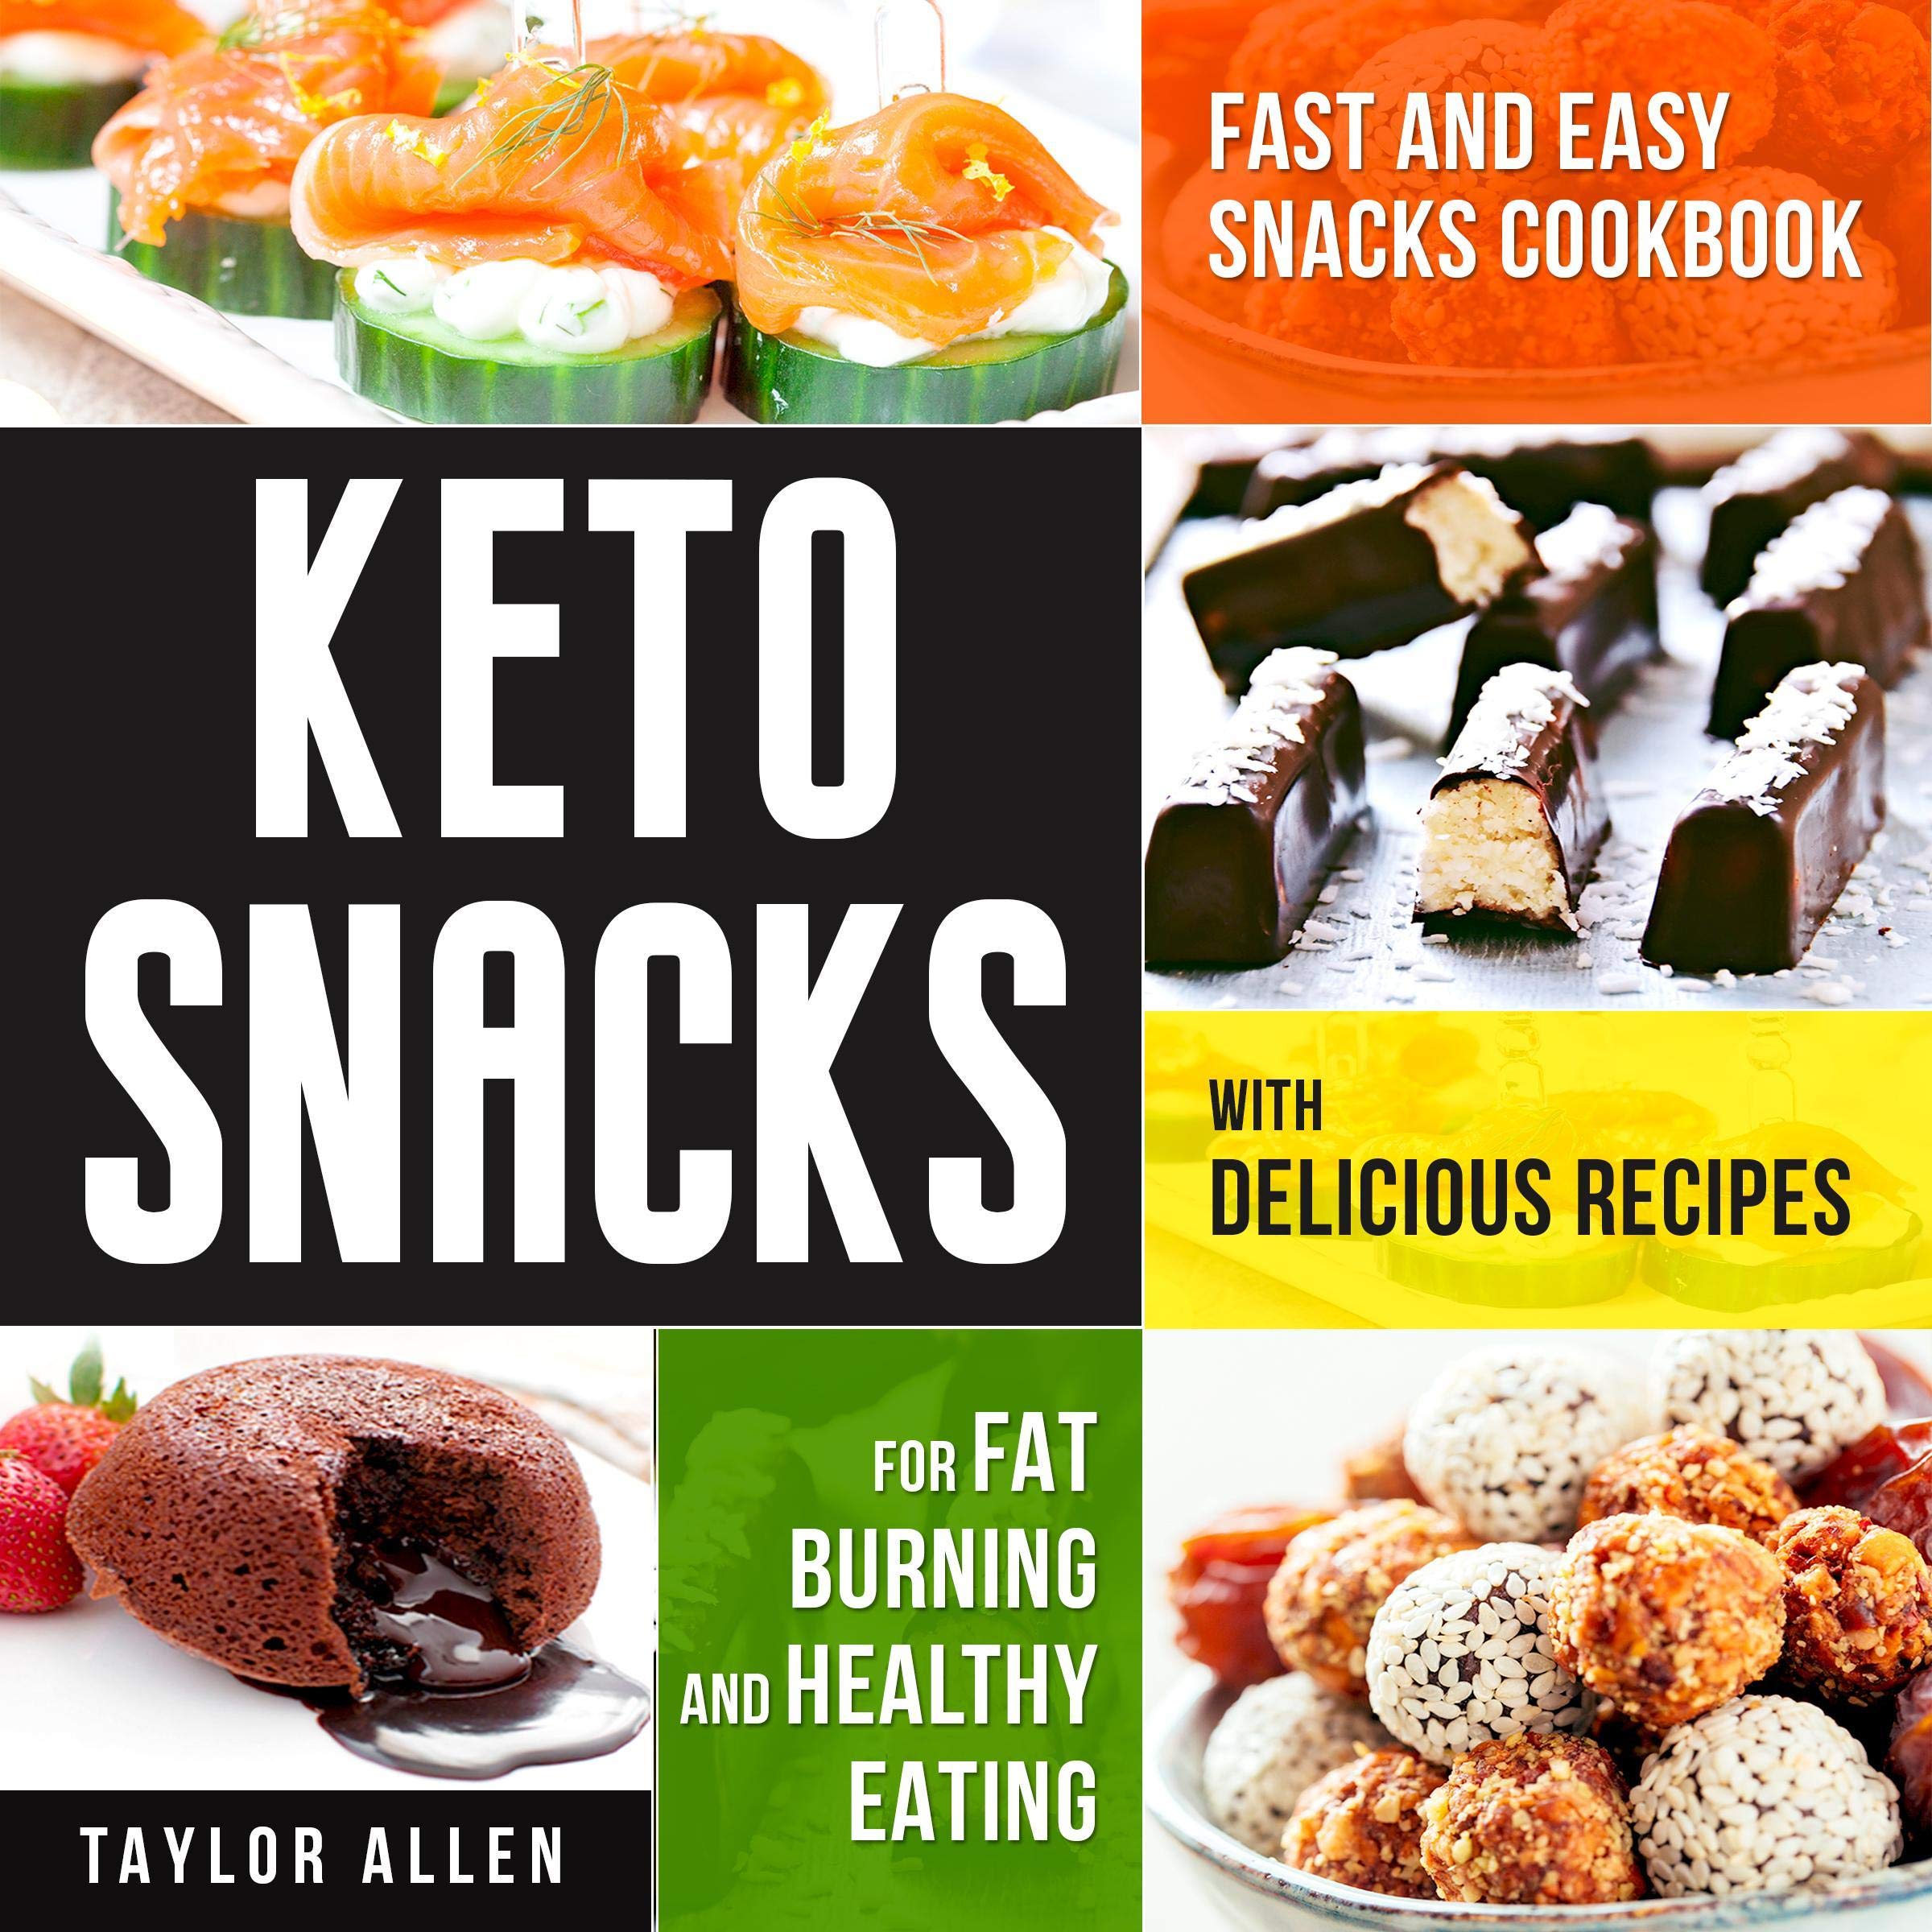 Keto Snacks: Fast and Easy Snacks Cookbook with Delicious Recipes for Fat Burning and Healthy Eating